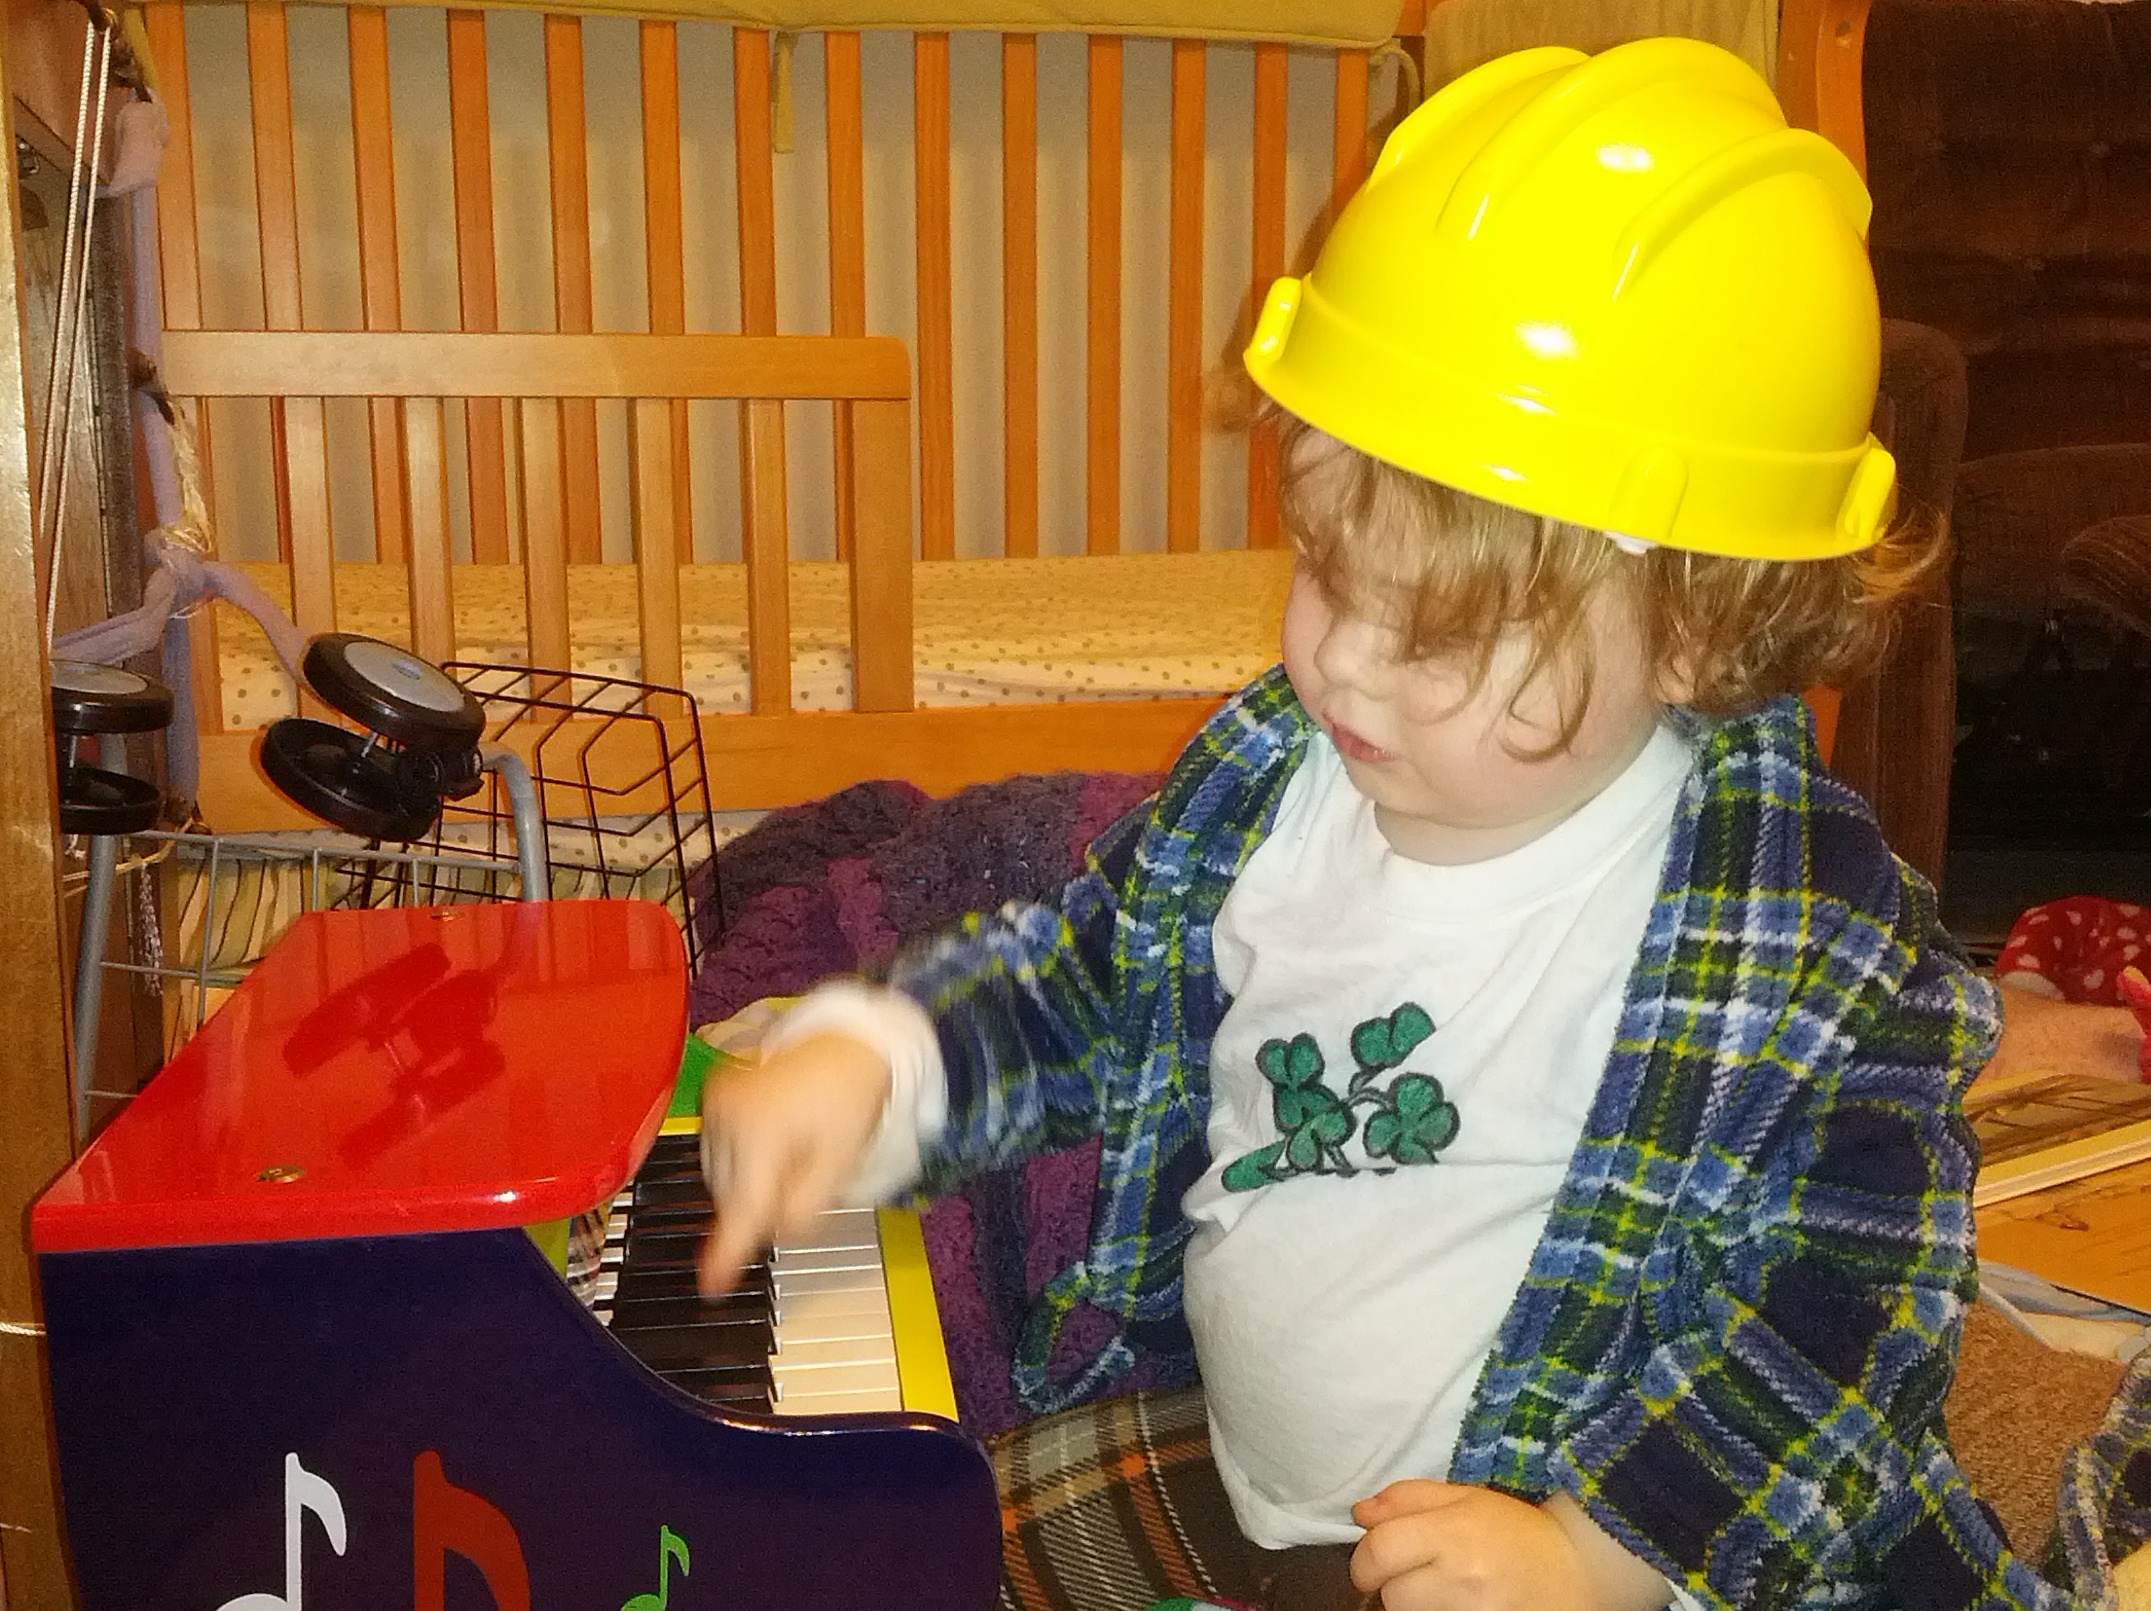 Wearing a hardhat and robe to play the piano